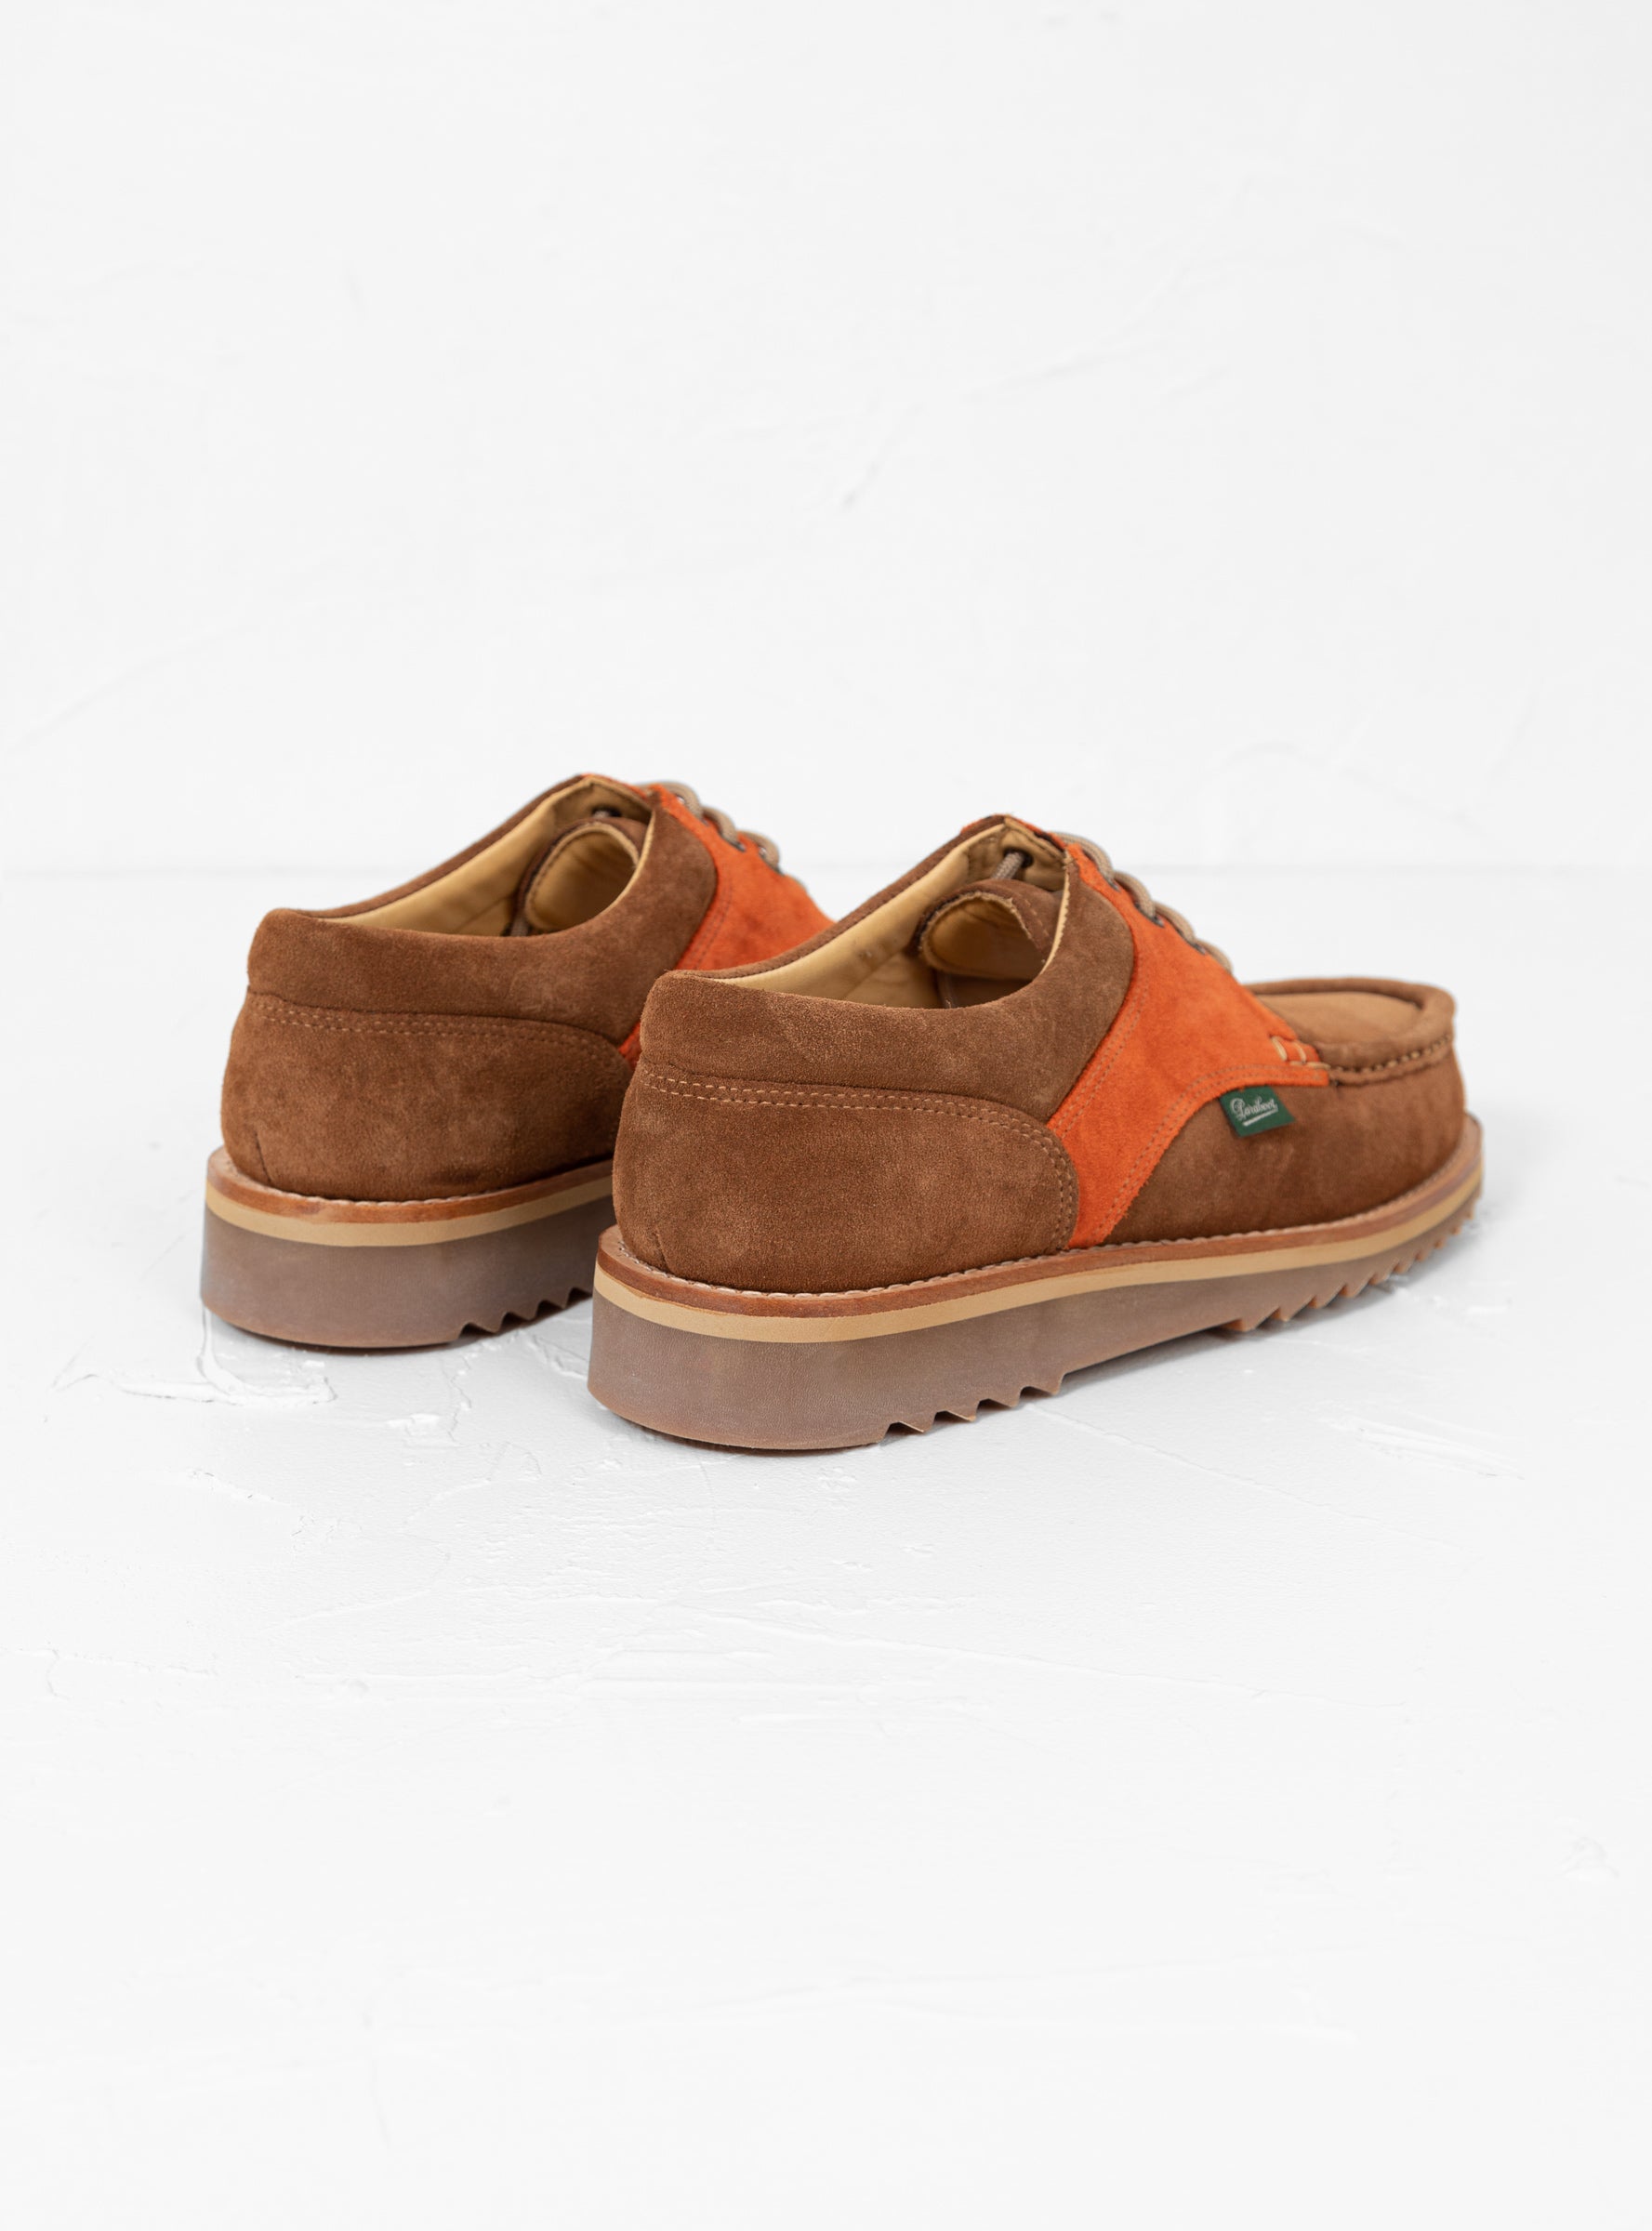 Paraboot Paraboot Thiers Suede Shoes Sand & Orange - Size: UK 8